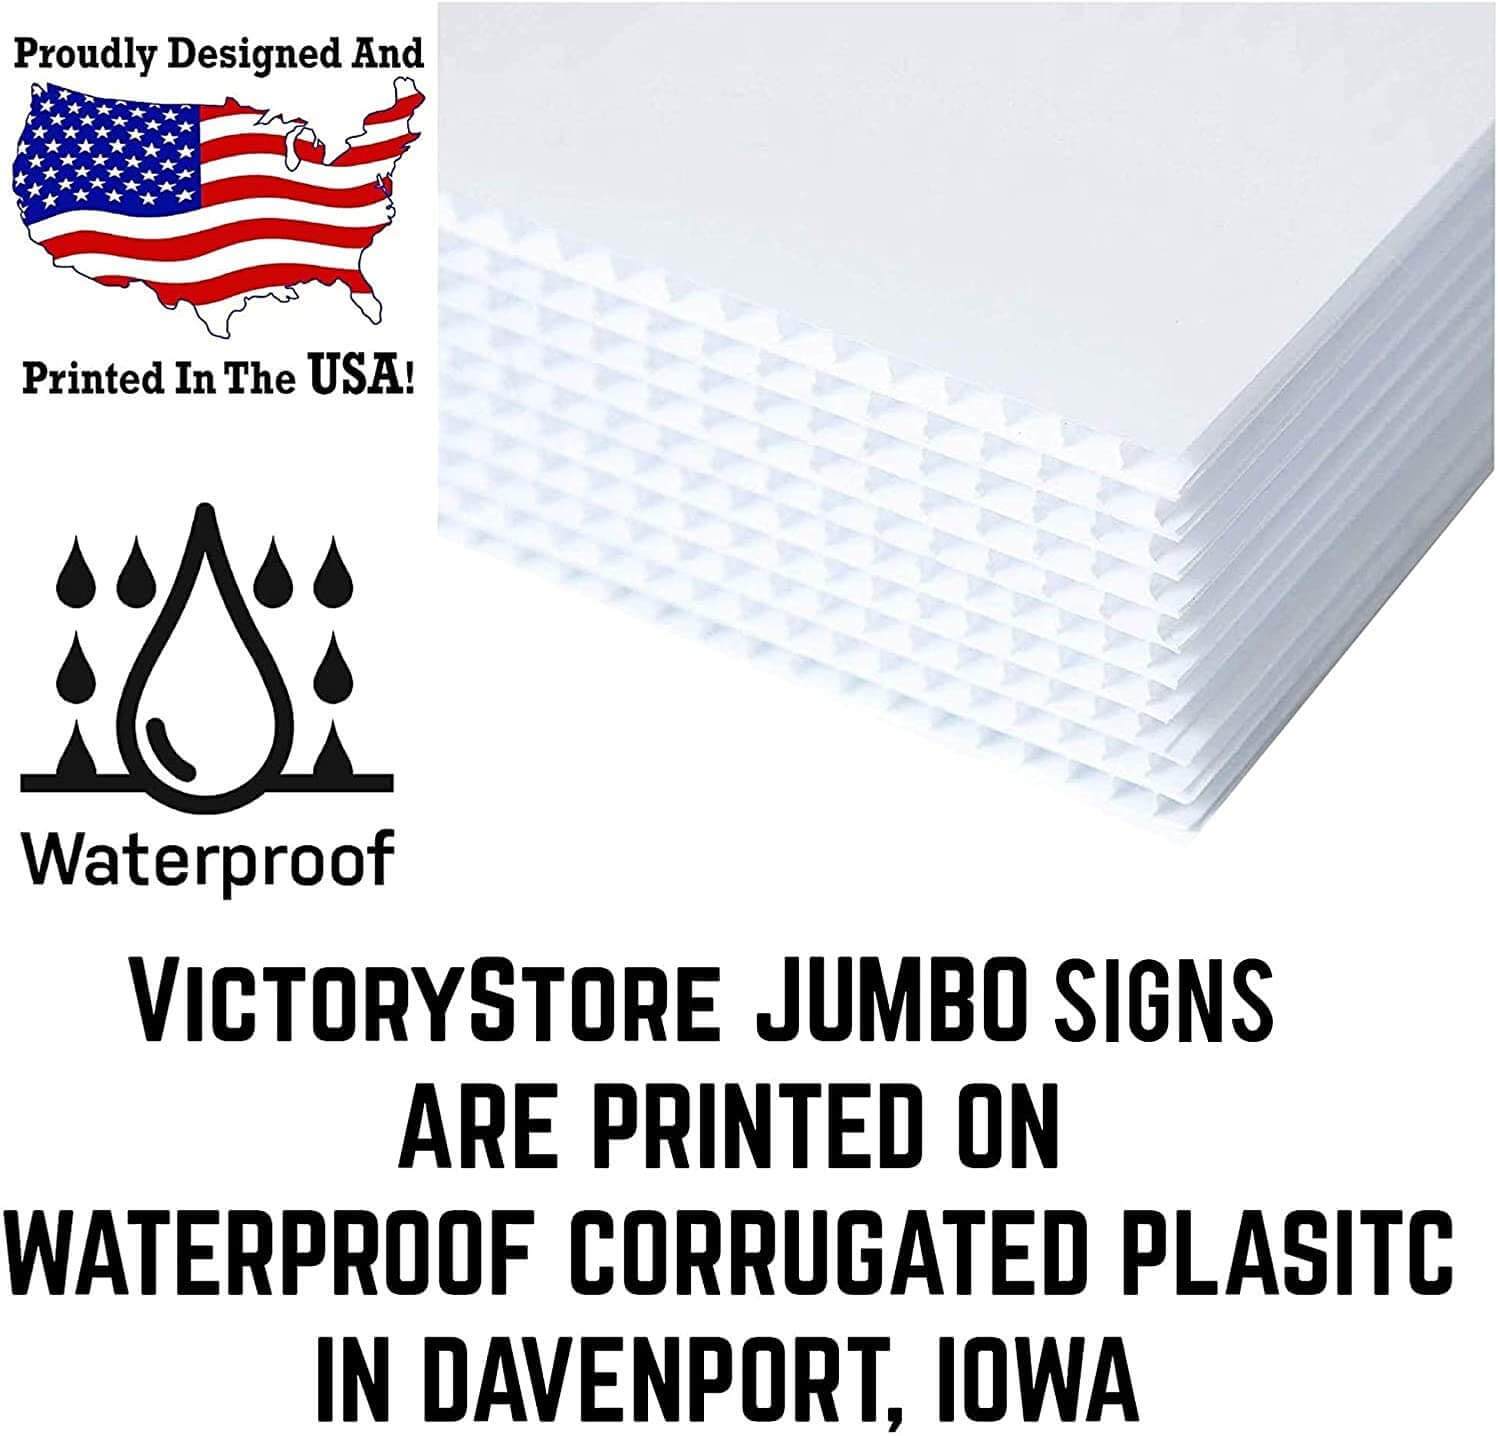 waterproof corrugated plastic yard signs made in the USA